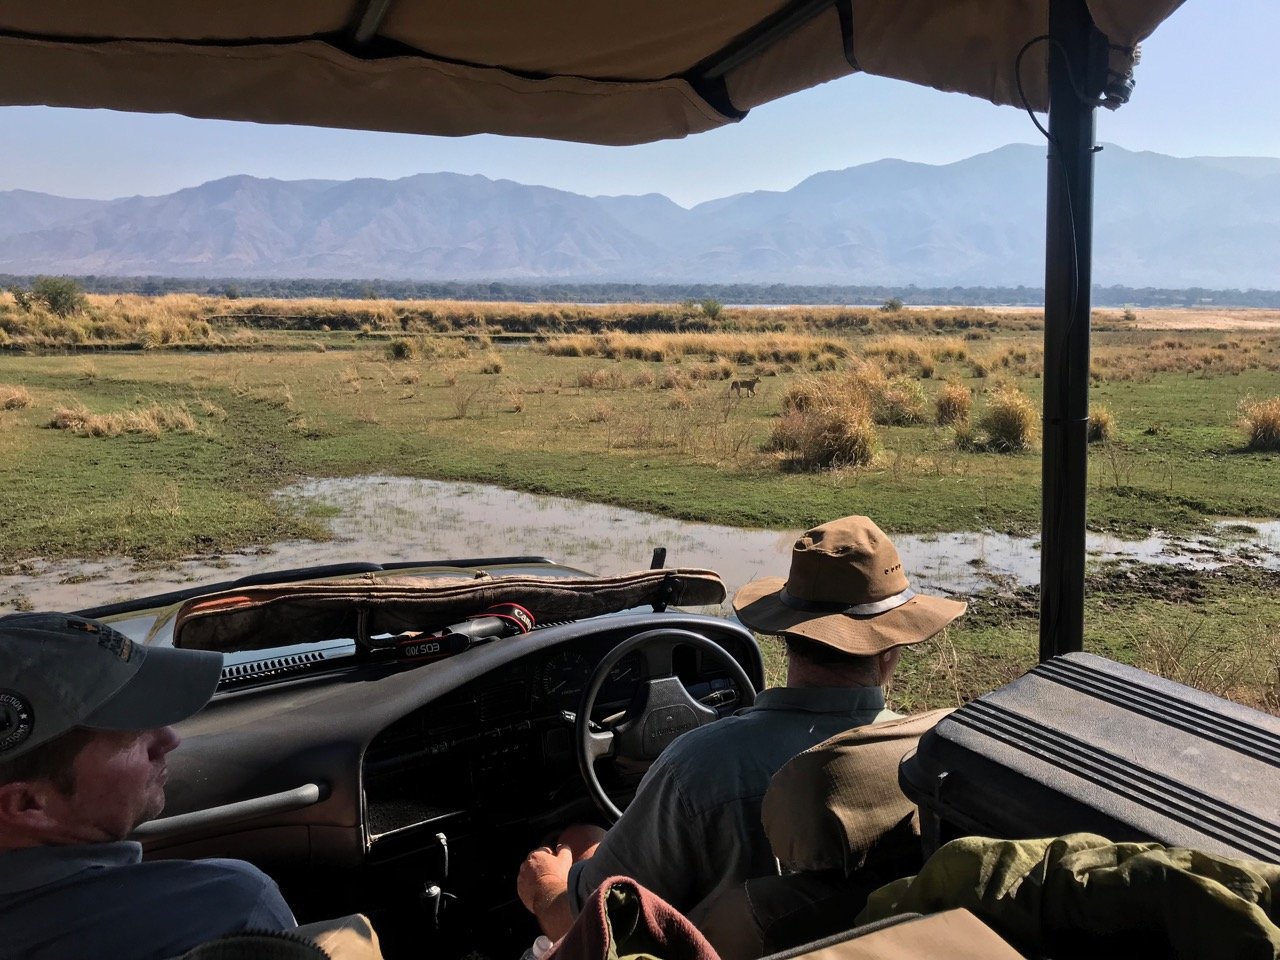 On safari in Mana Pools, where walking with the wildlife is also possible.